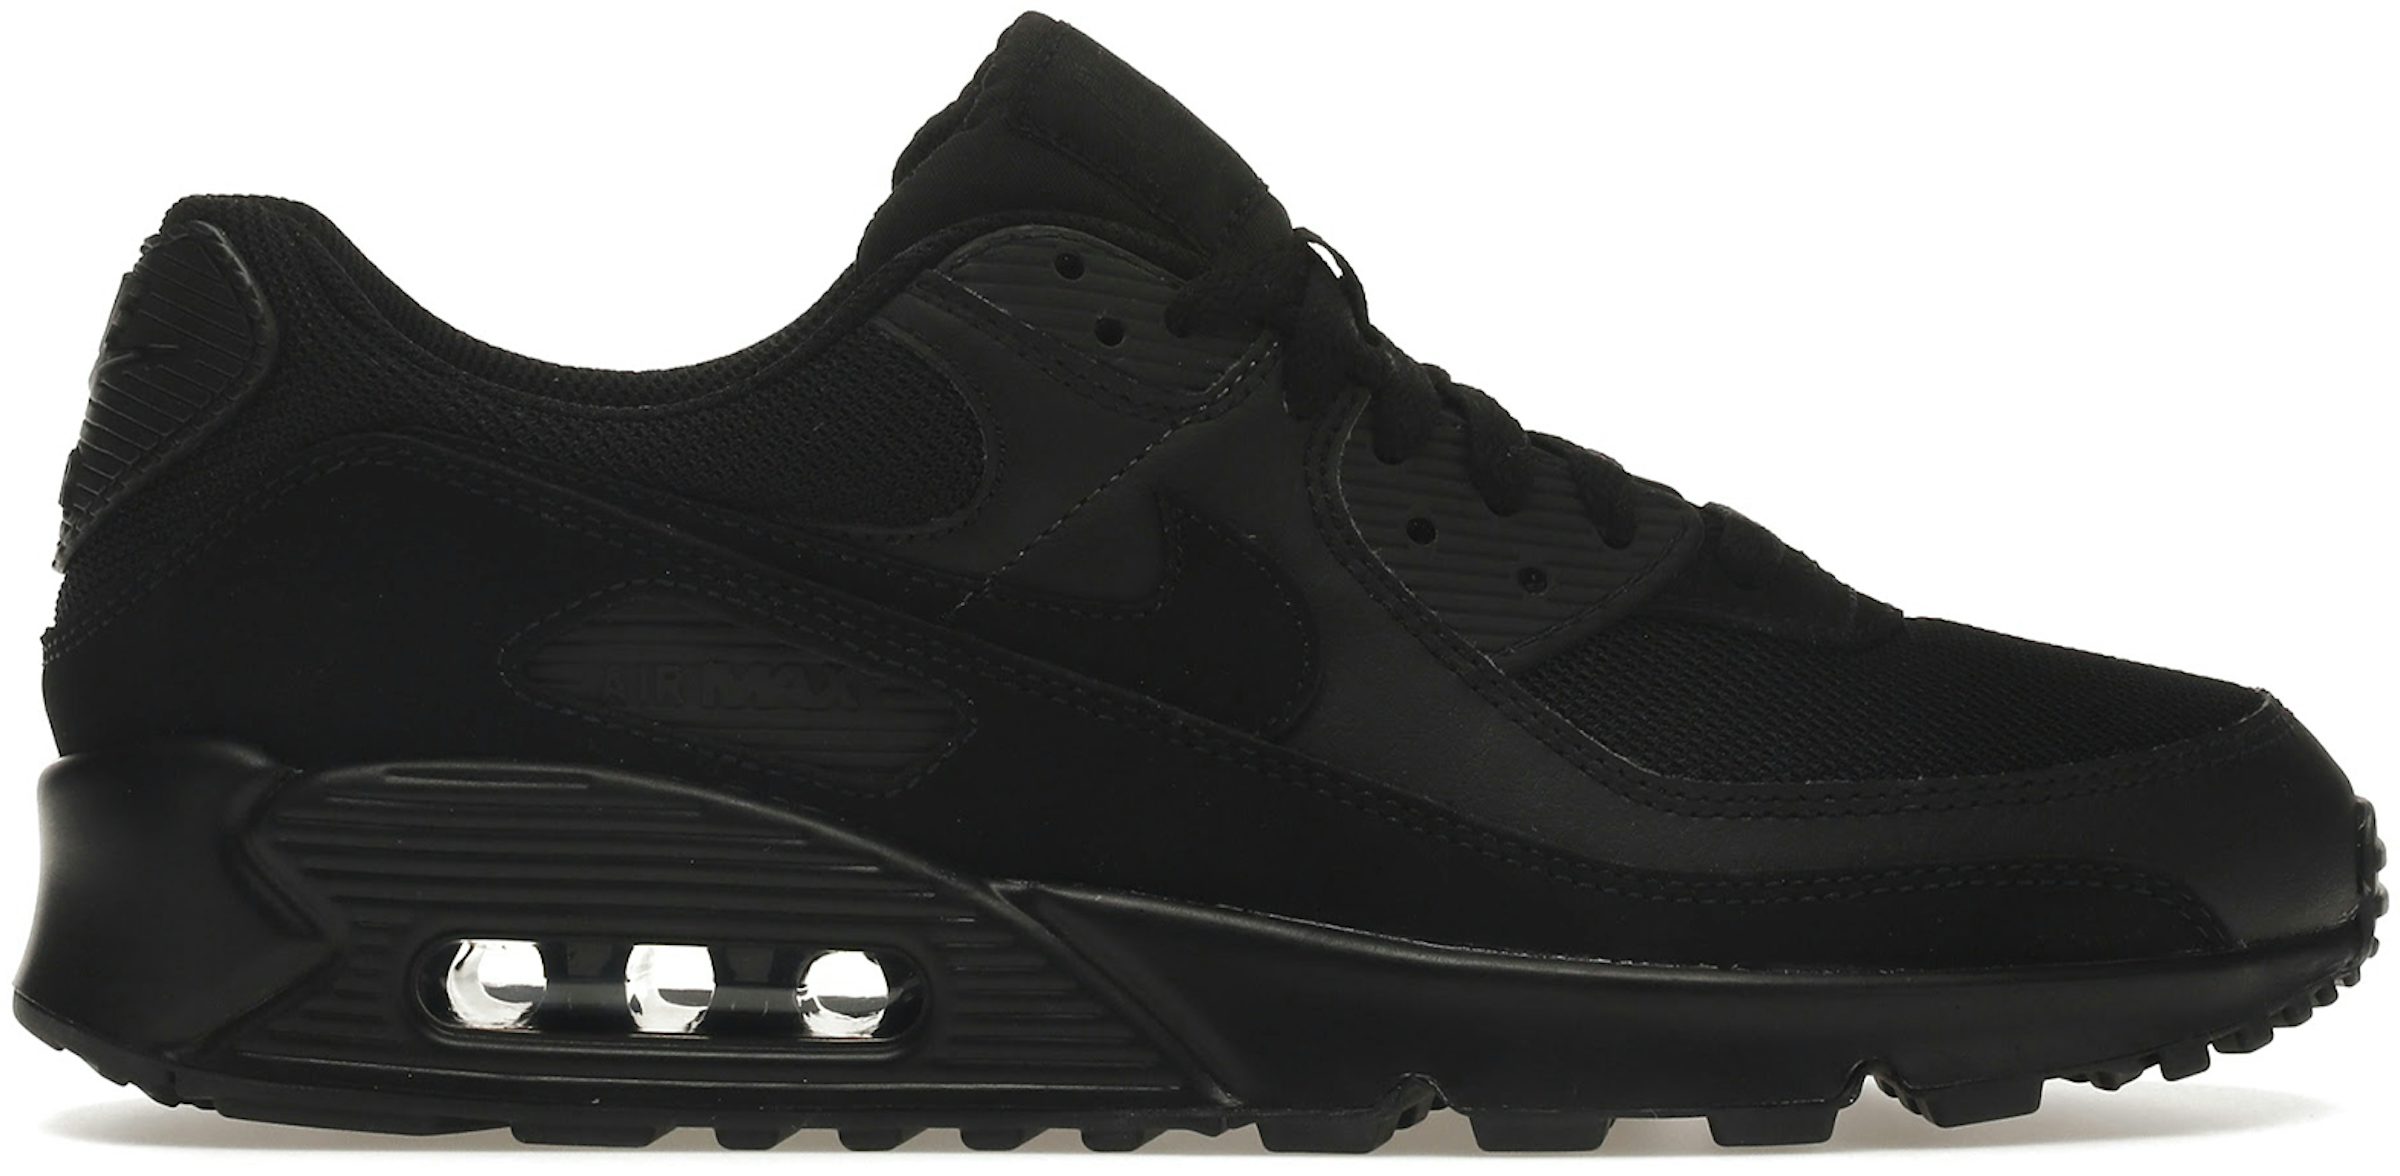 Off - Nike Air Max 90 Recraft trainers in black grey - White x